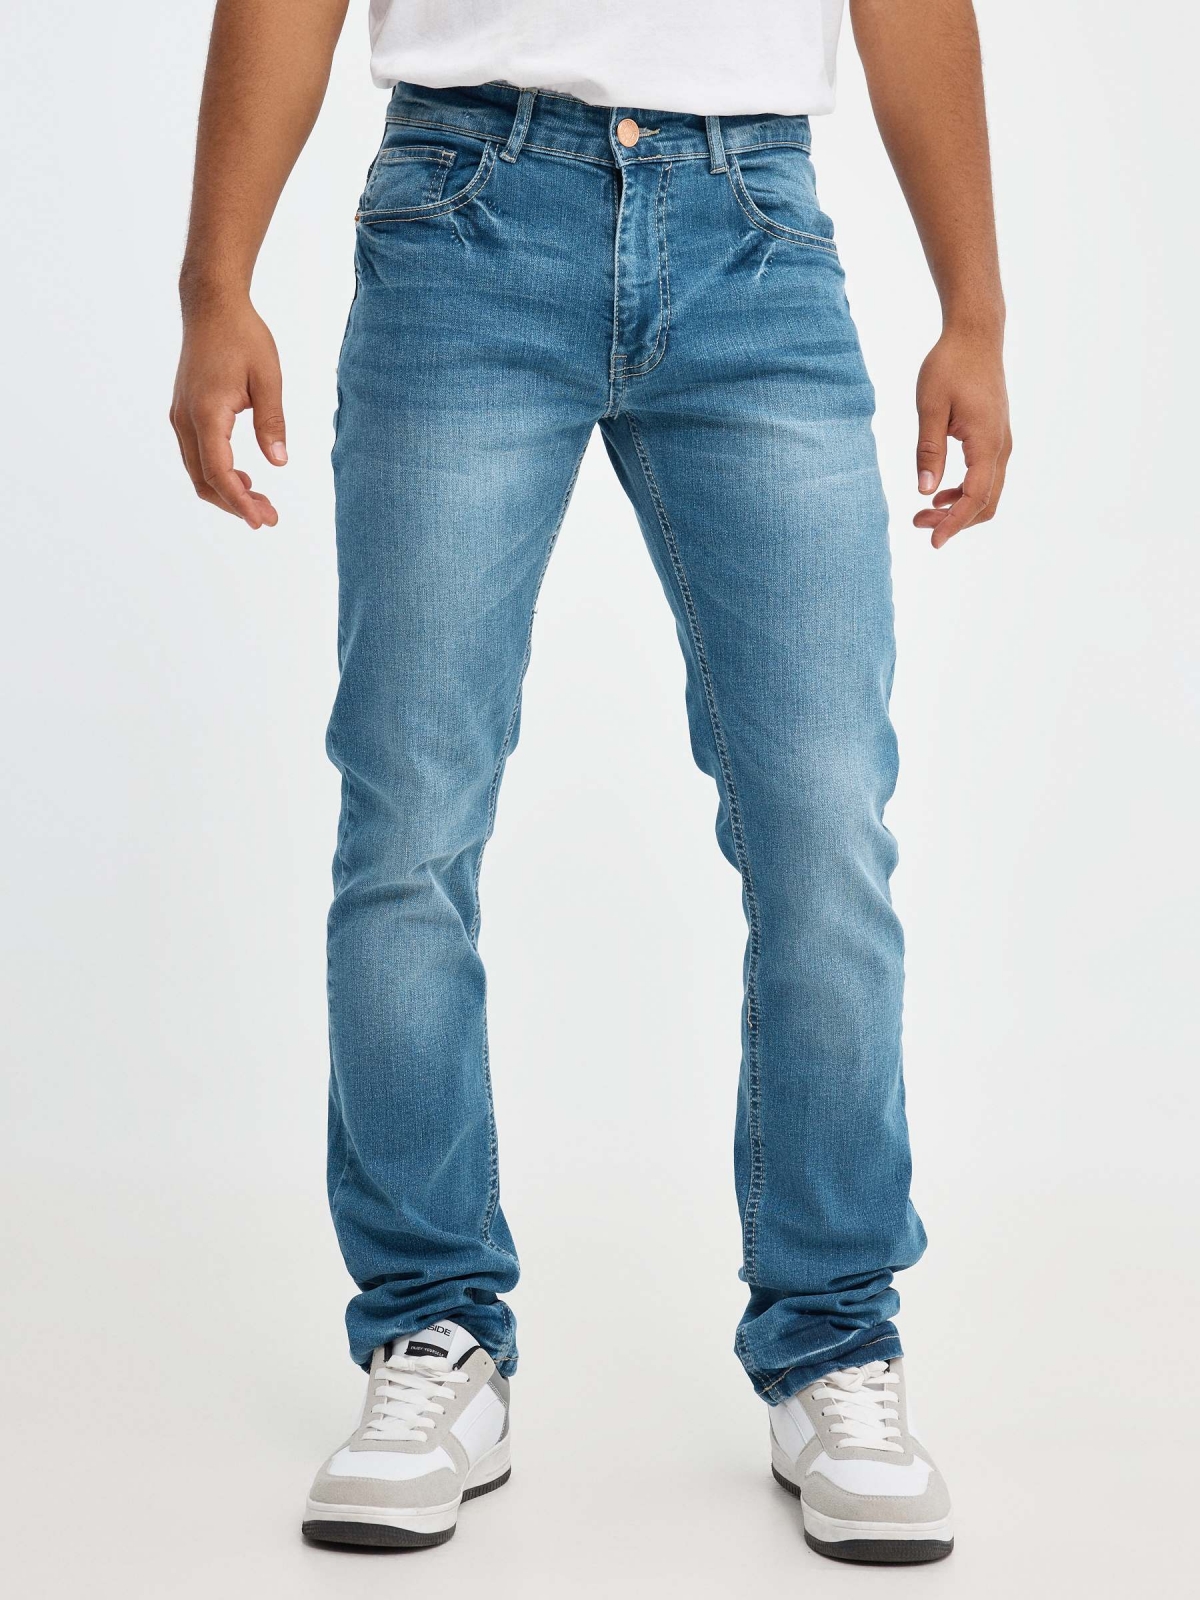 Basic blue jeans blue middle front view